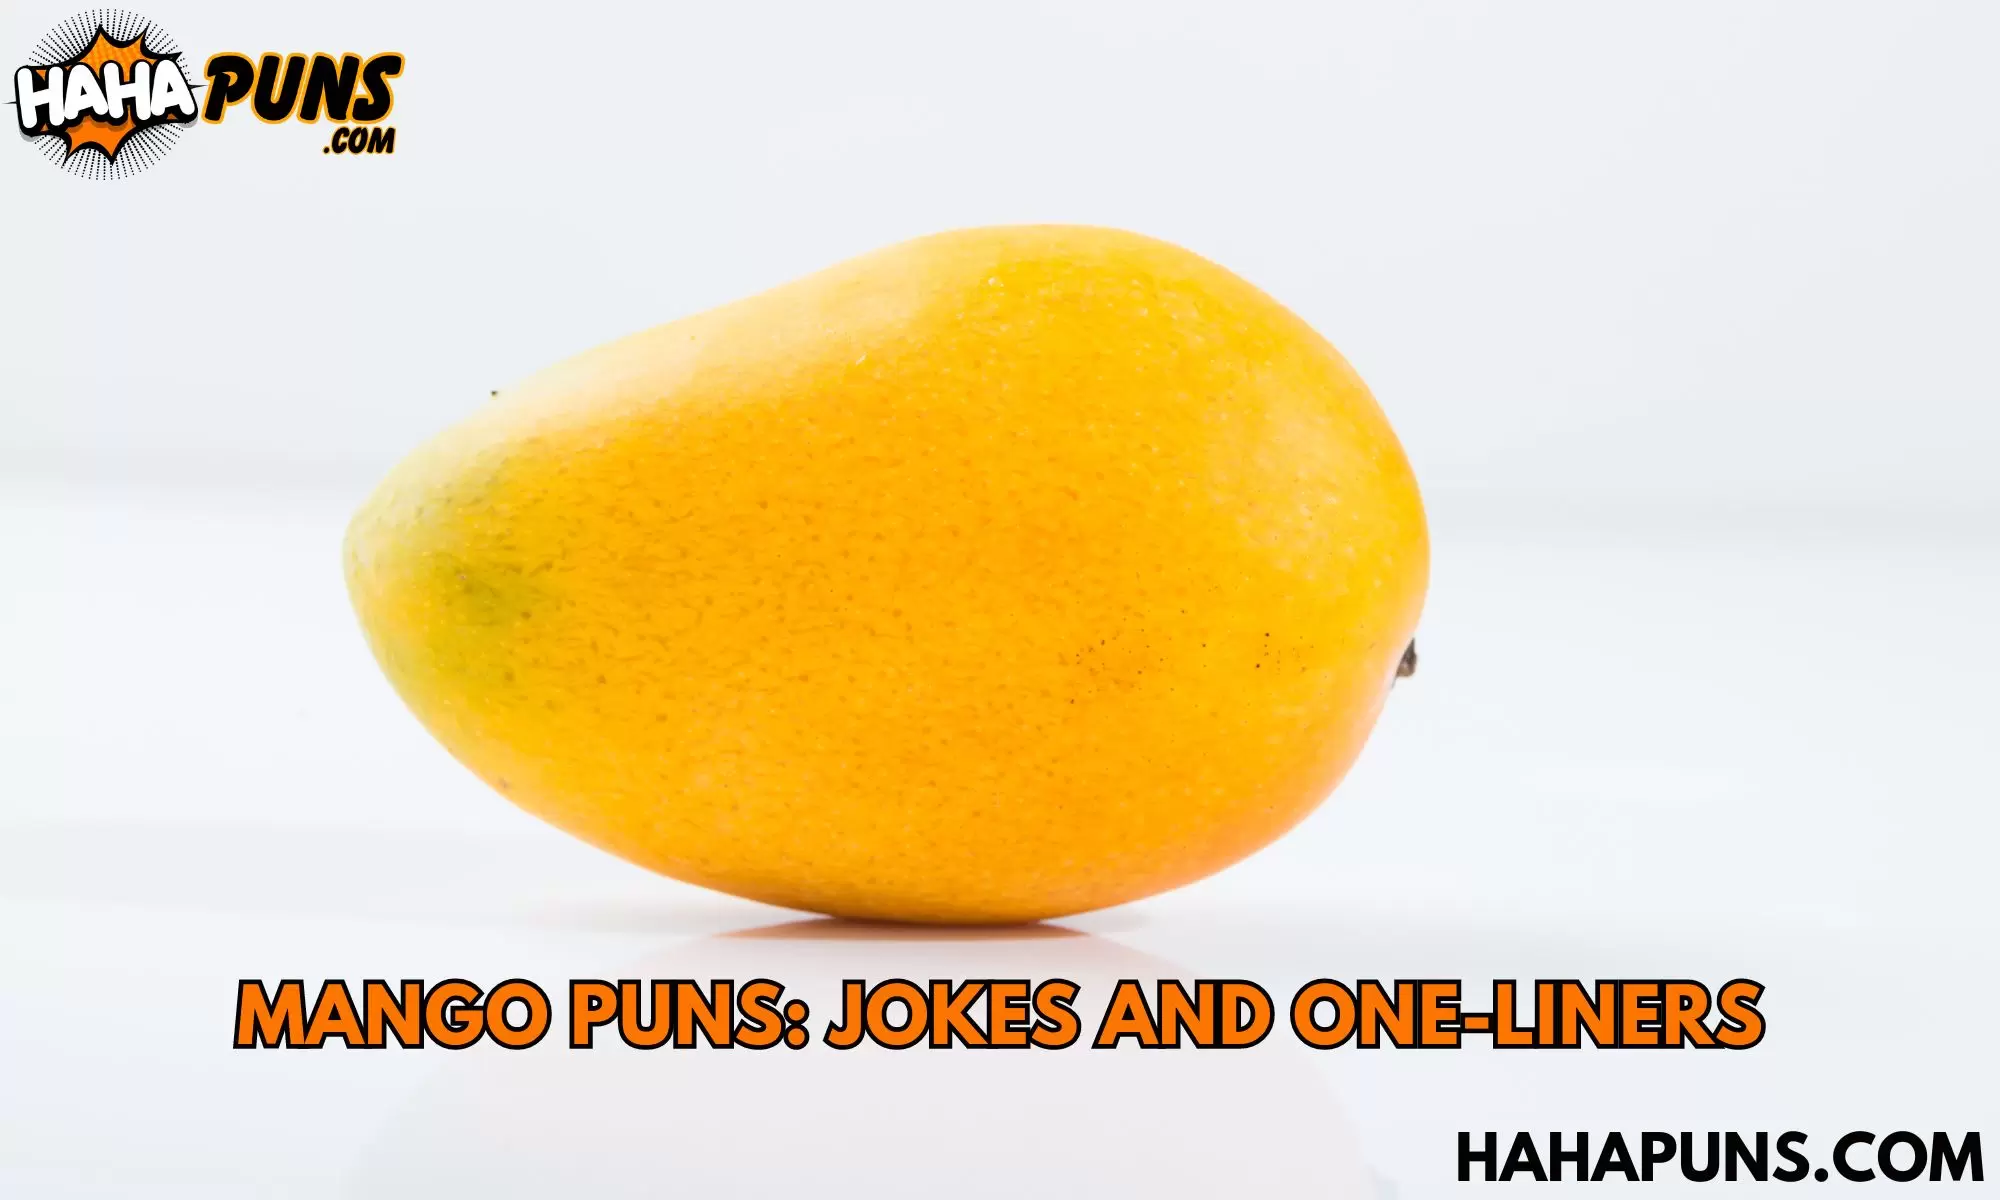 Mango Puns: Jokes And One-Liners